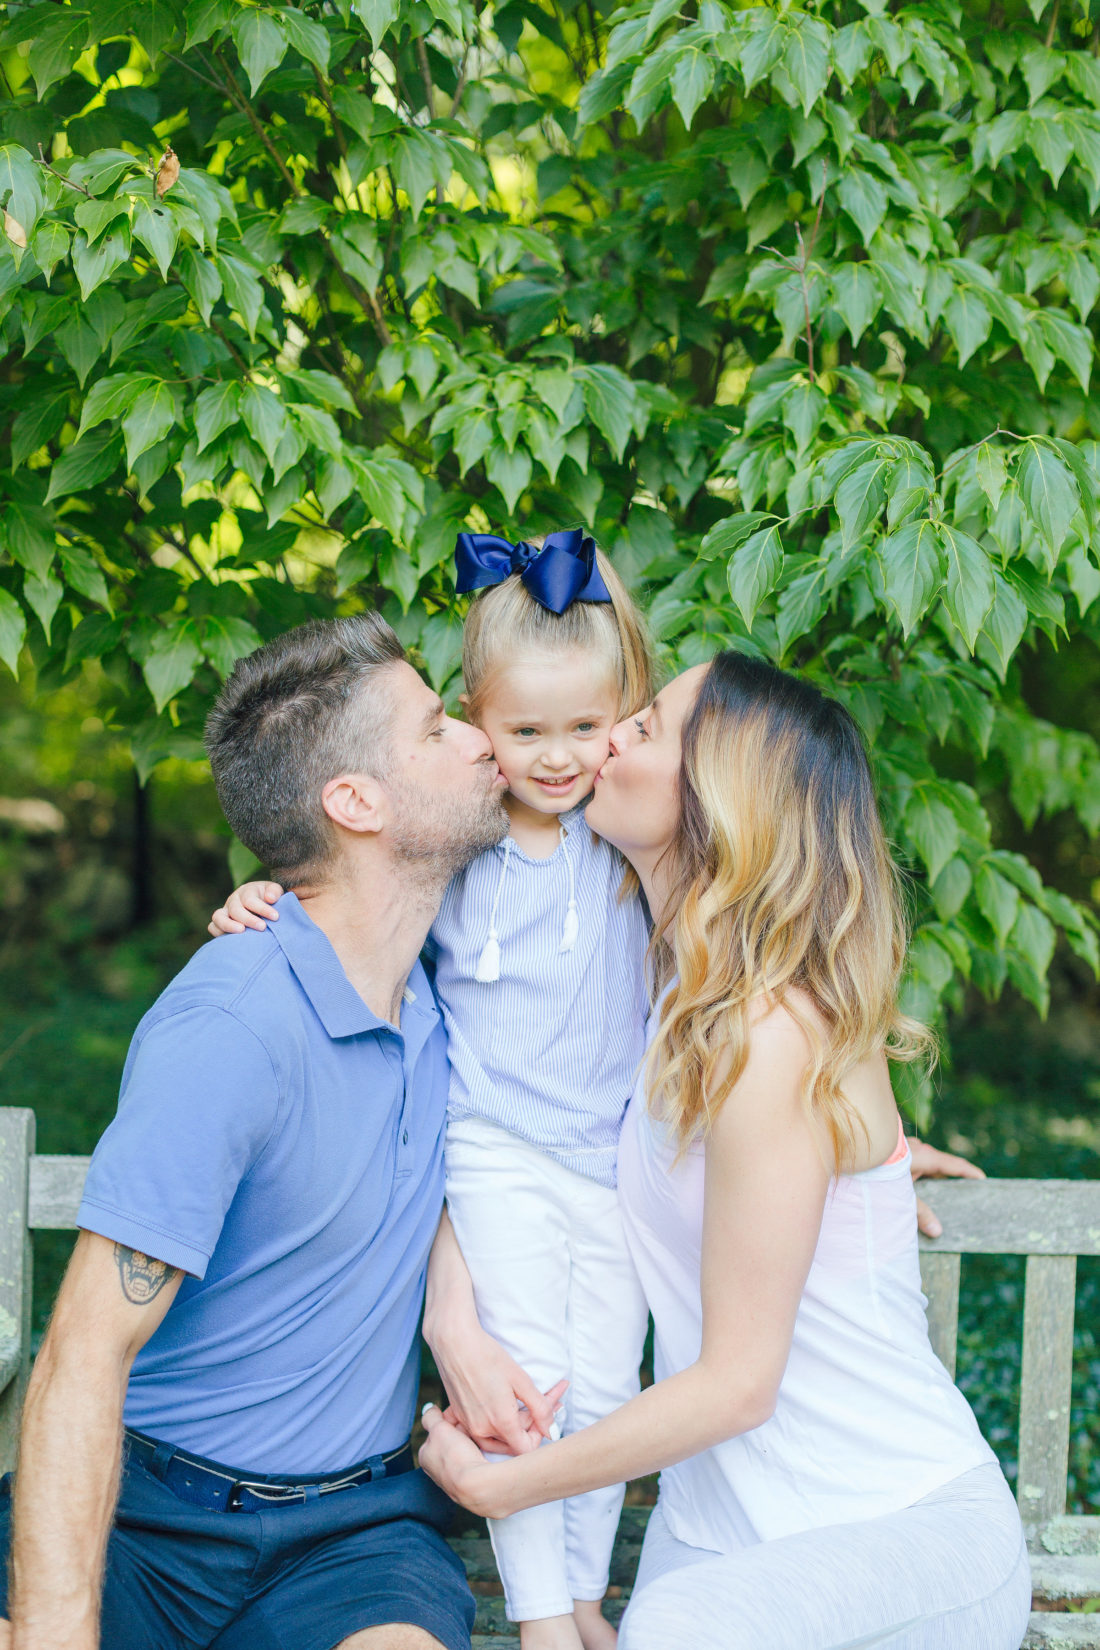 Eva Amurri Martino and Kyle Martino sit on either side of daughter Marlowe and kiss her on the cheeks